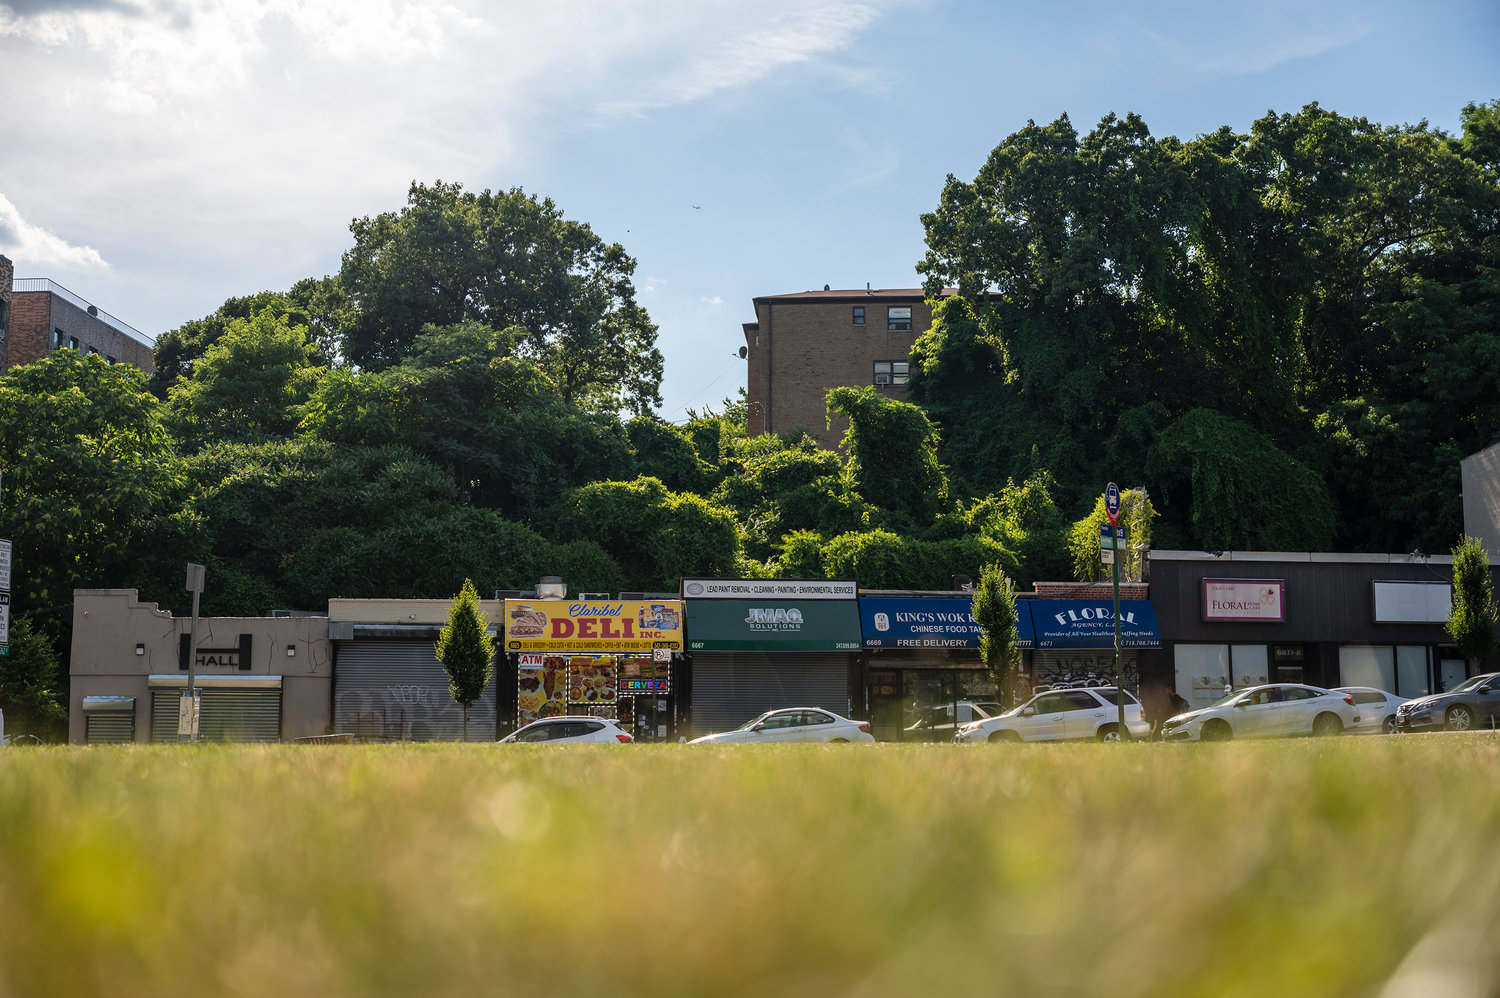 The site of AAPCI's proposed men’s shelter on Broadway and West 262nd Street in North Riverdale on July 13.